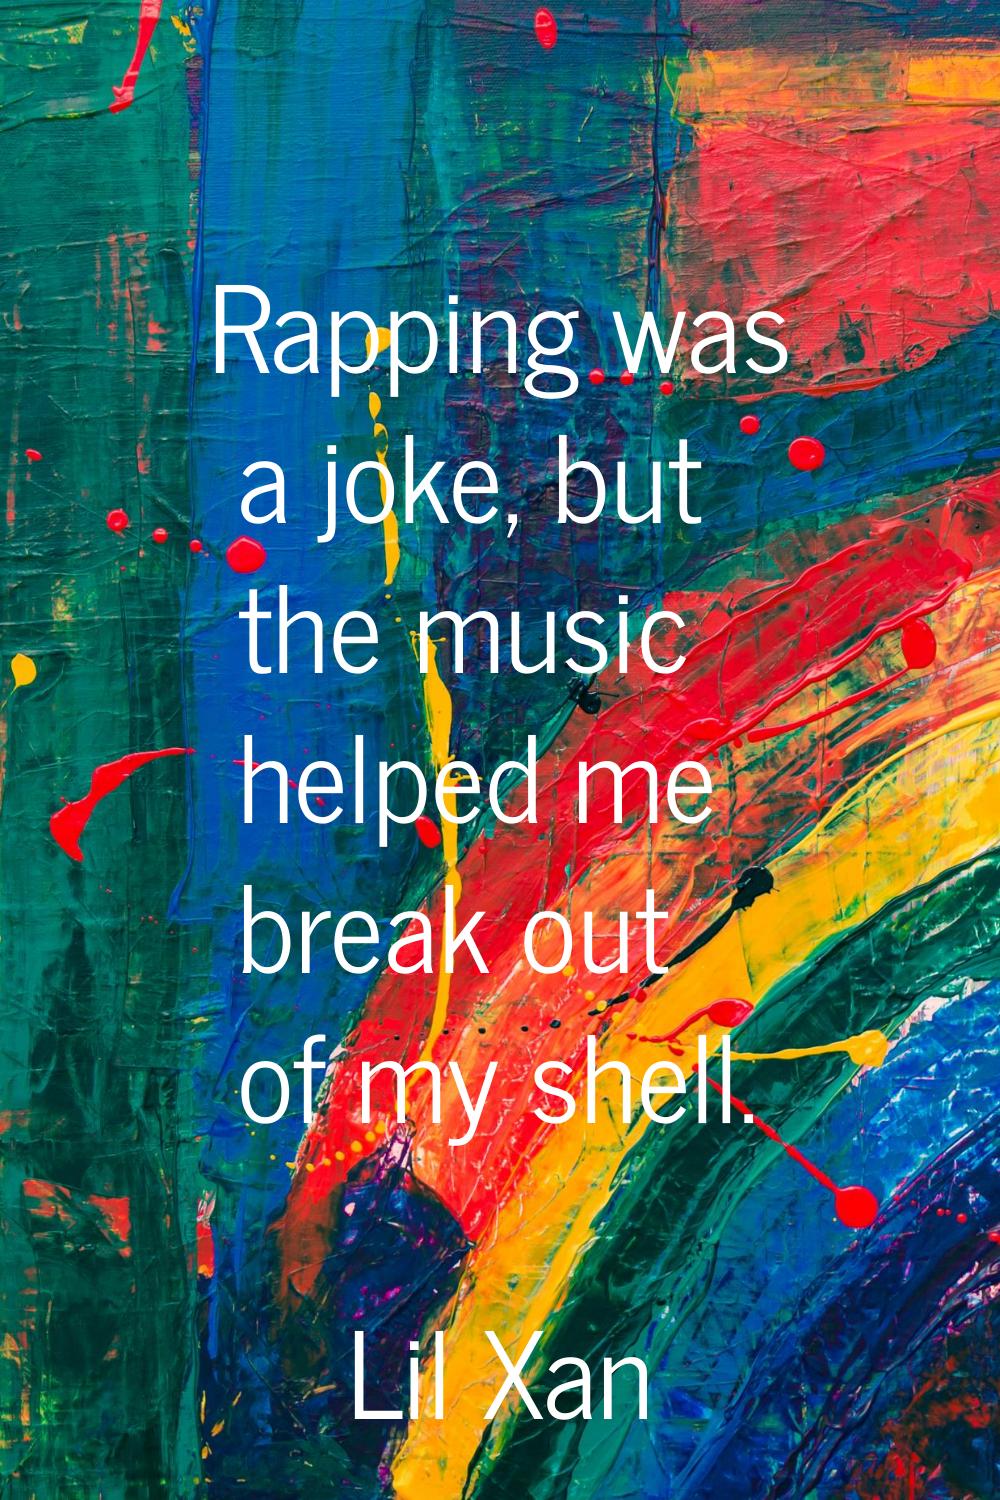 Rapping was a joke, but the music helped me break out of my shell.